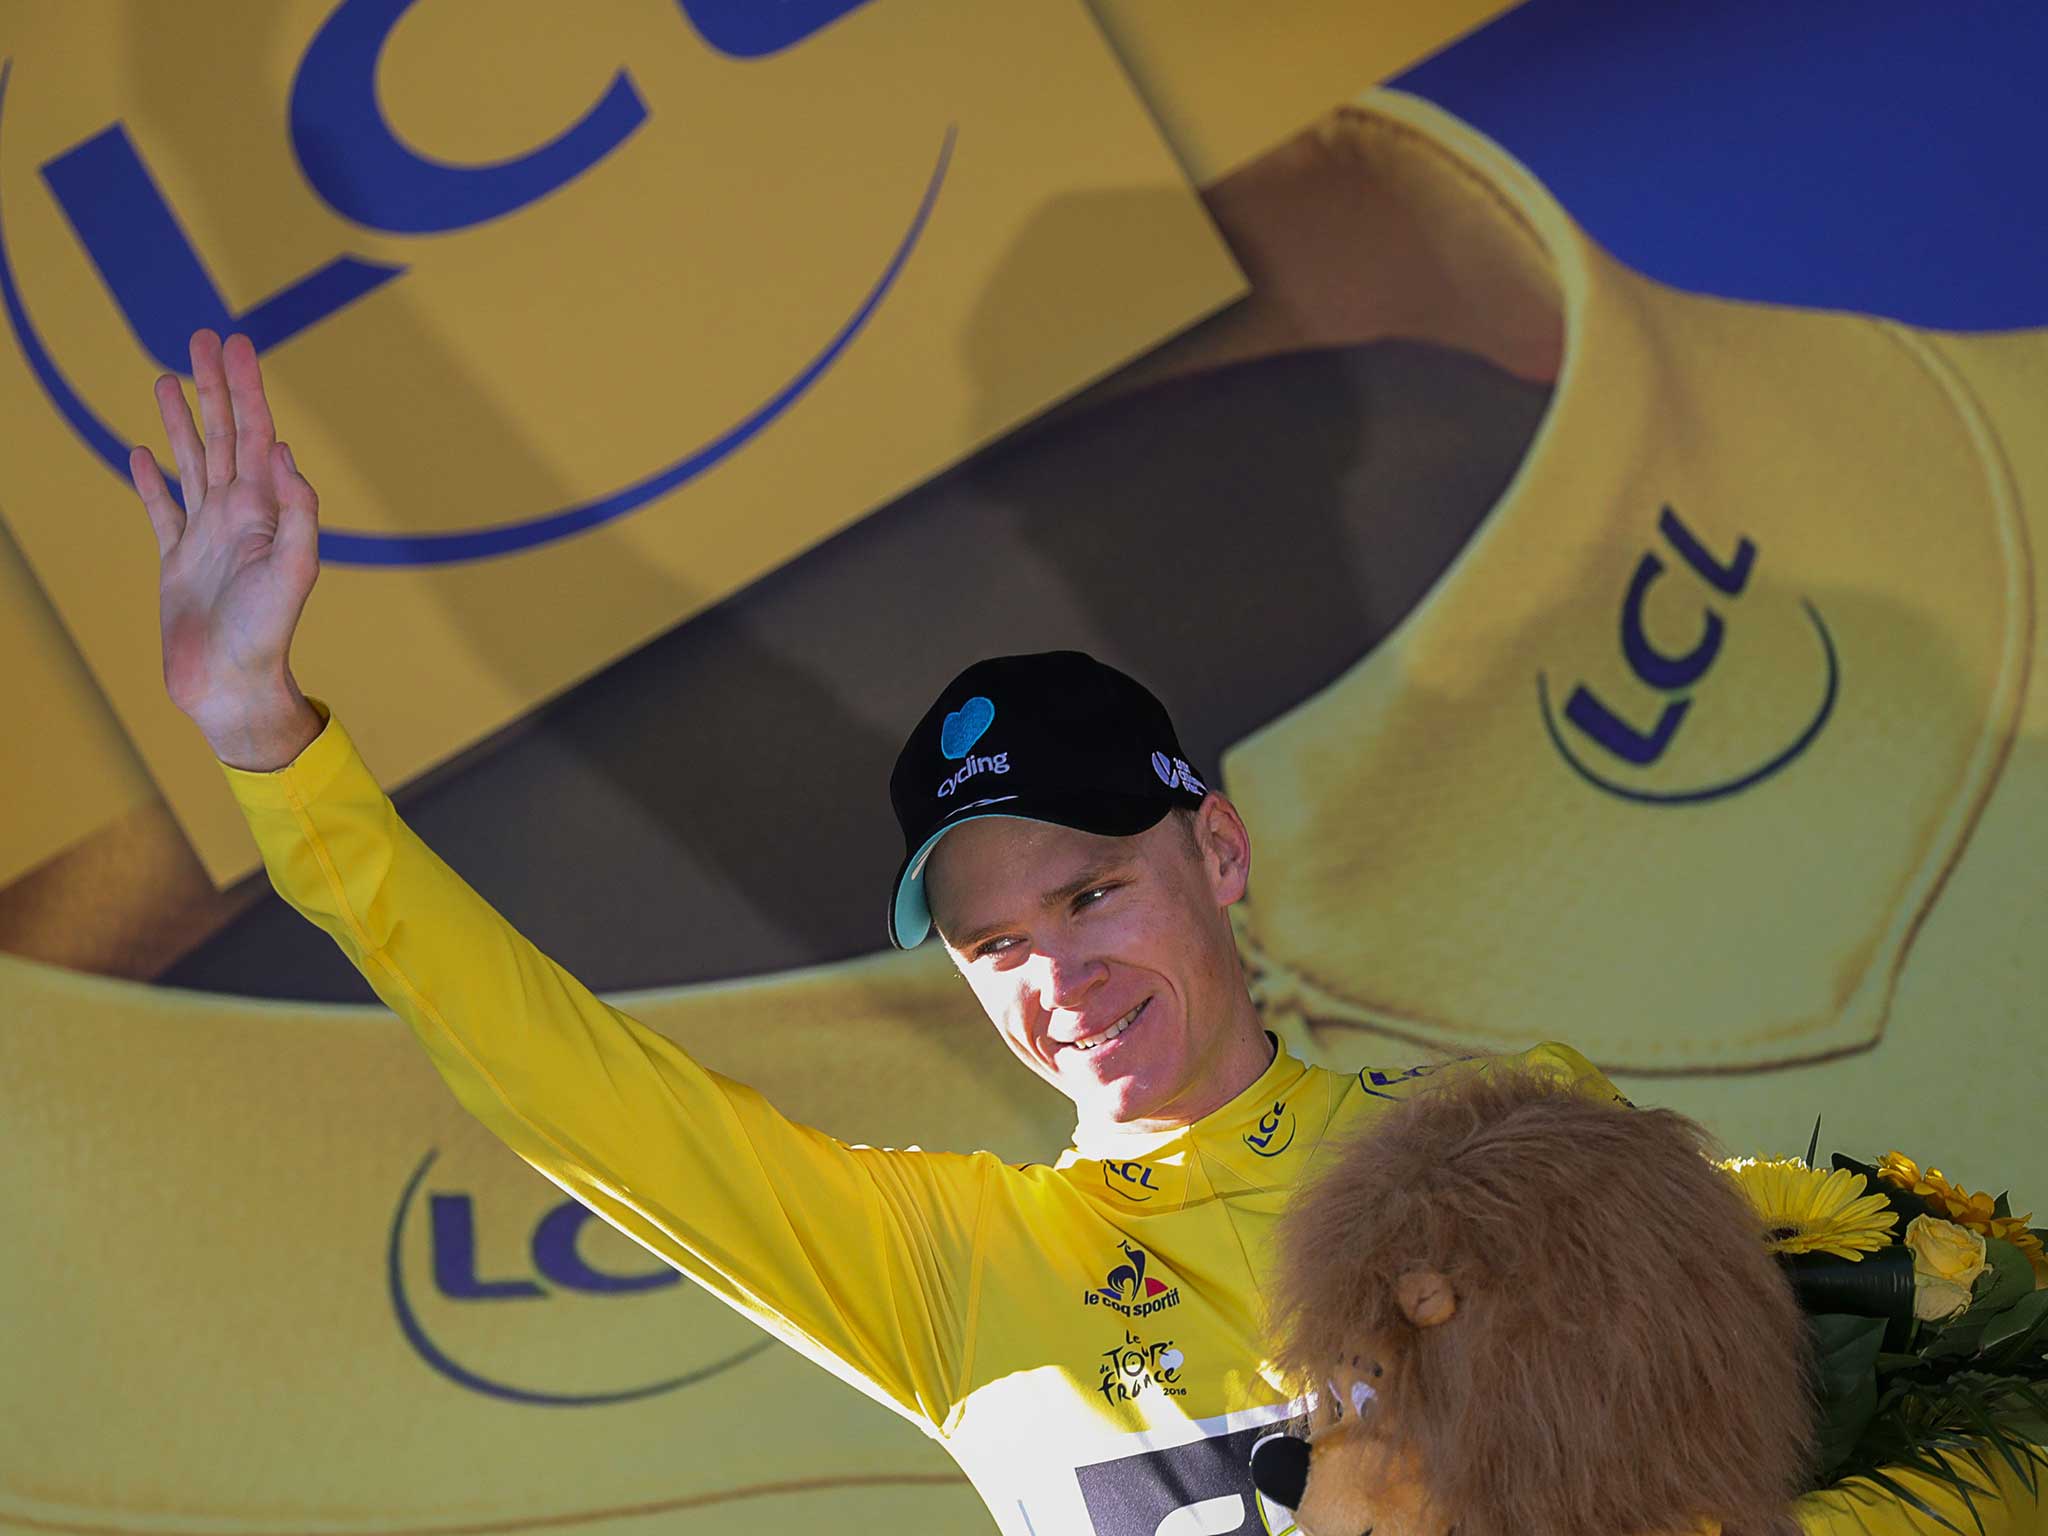 Chris Froome retains the yellow jersey